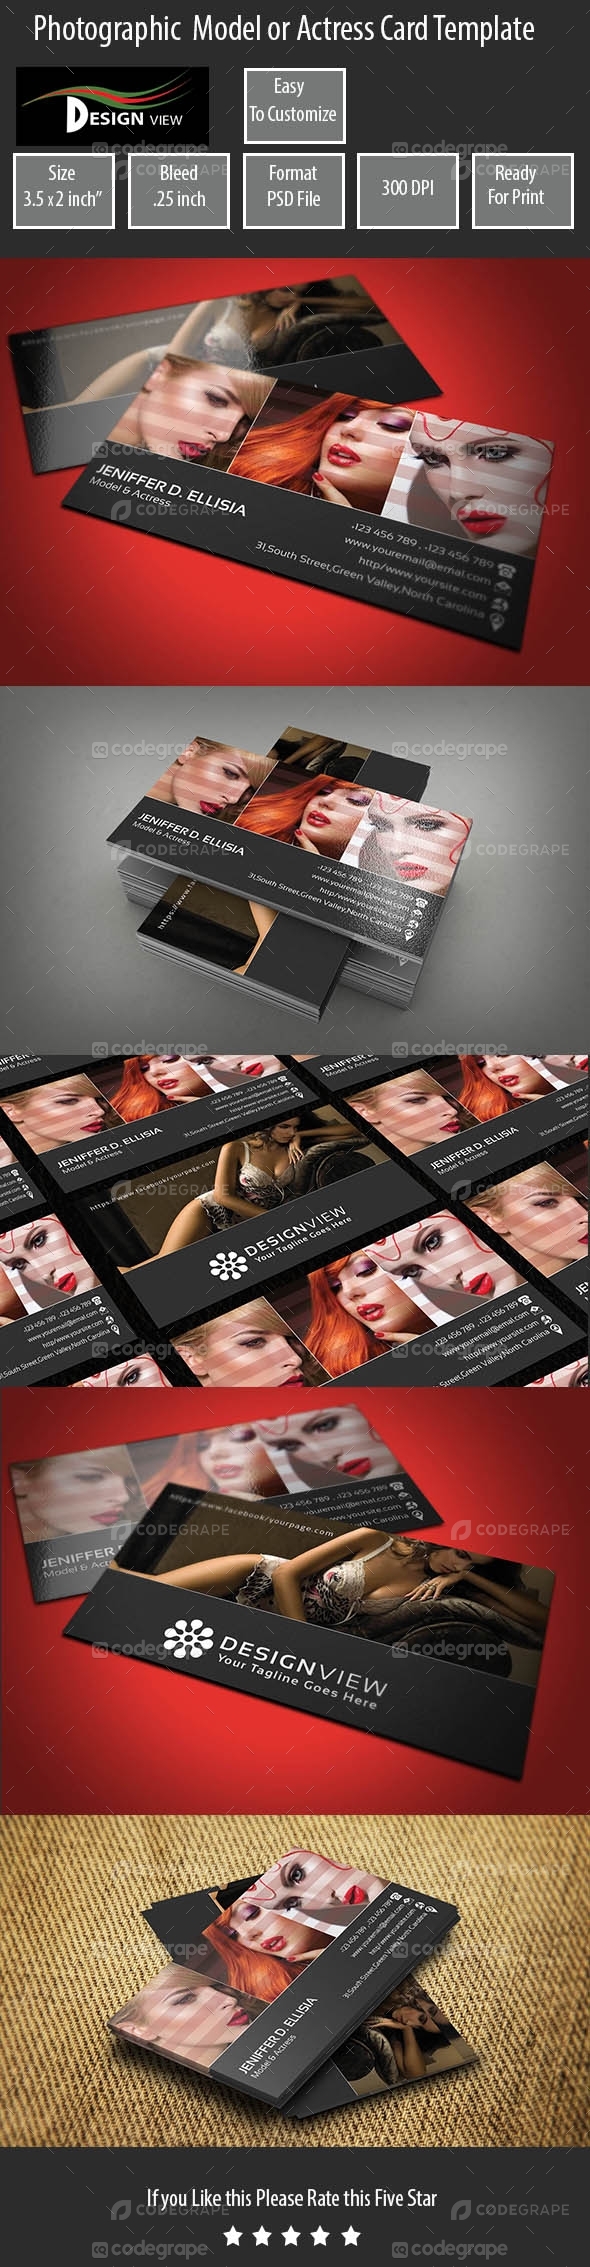 Photographic Model or Actress Business Card Template